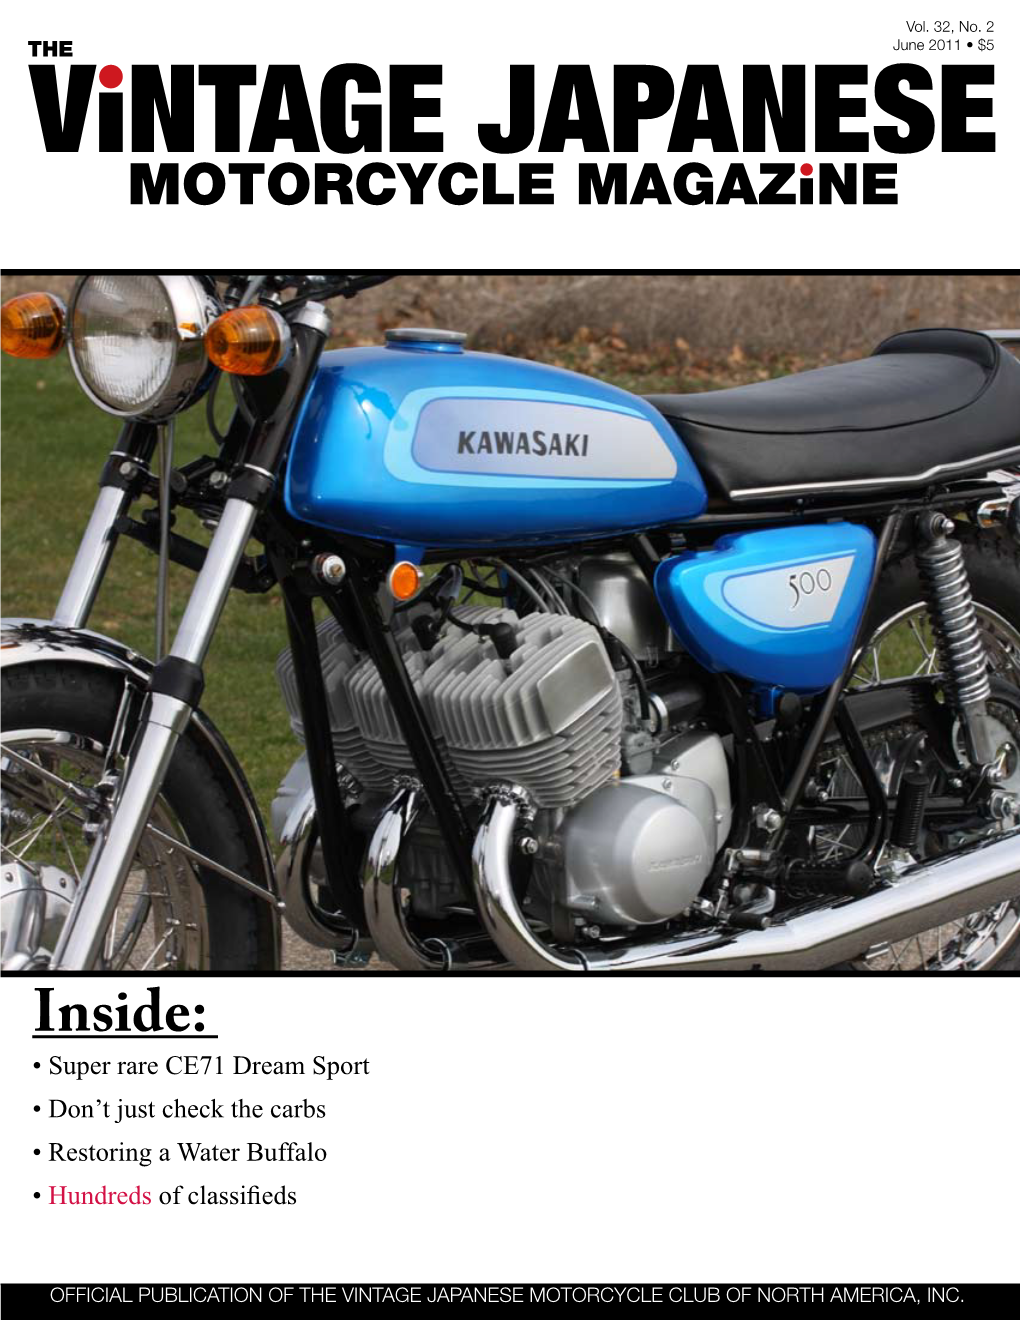 Inside: Super Rare CE71 Dream Sport • Don’T Just Check the Carbs • Restoring a Water Buffalo • Hundreds of Classifieds